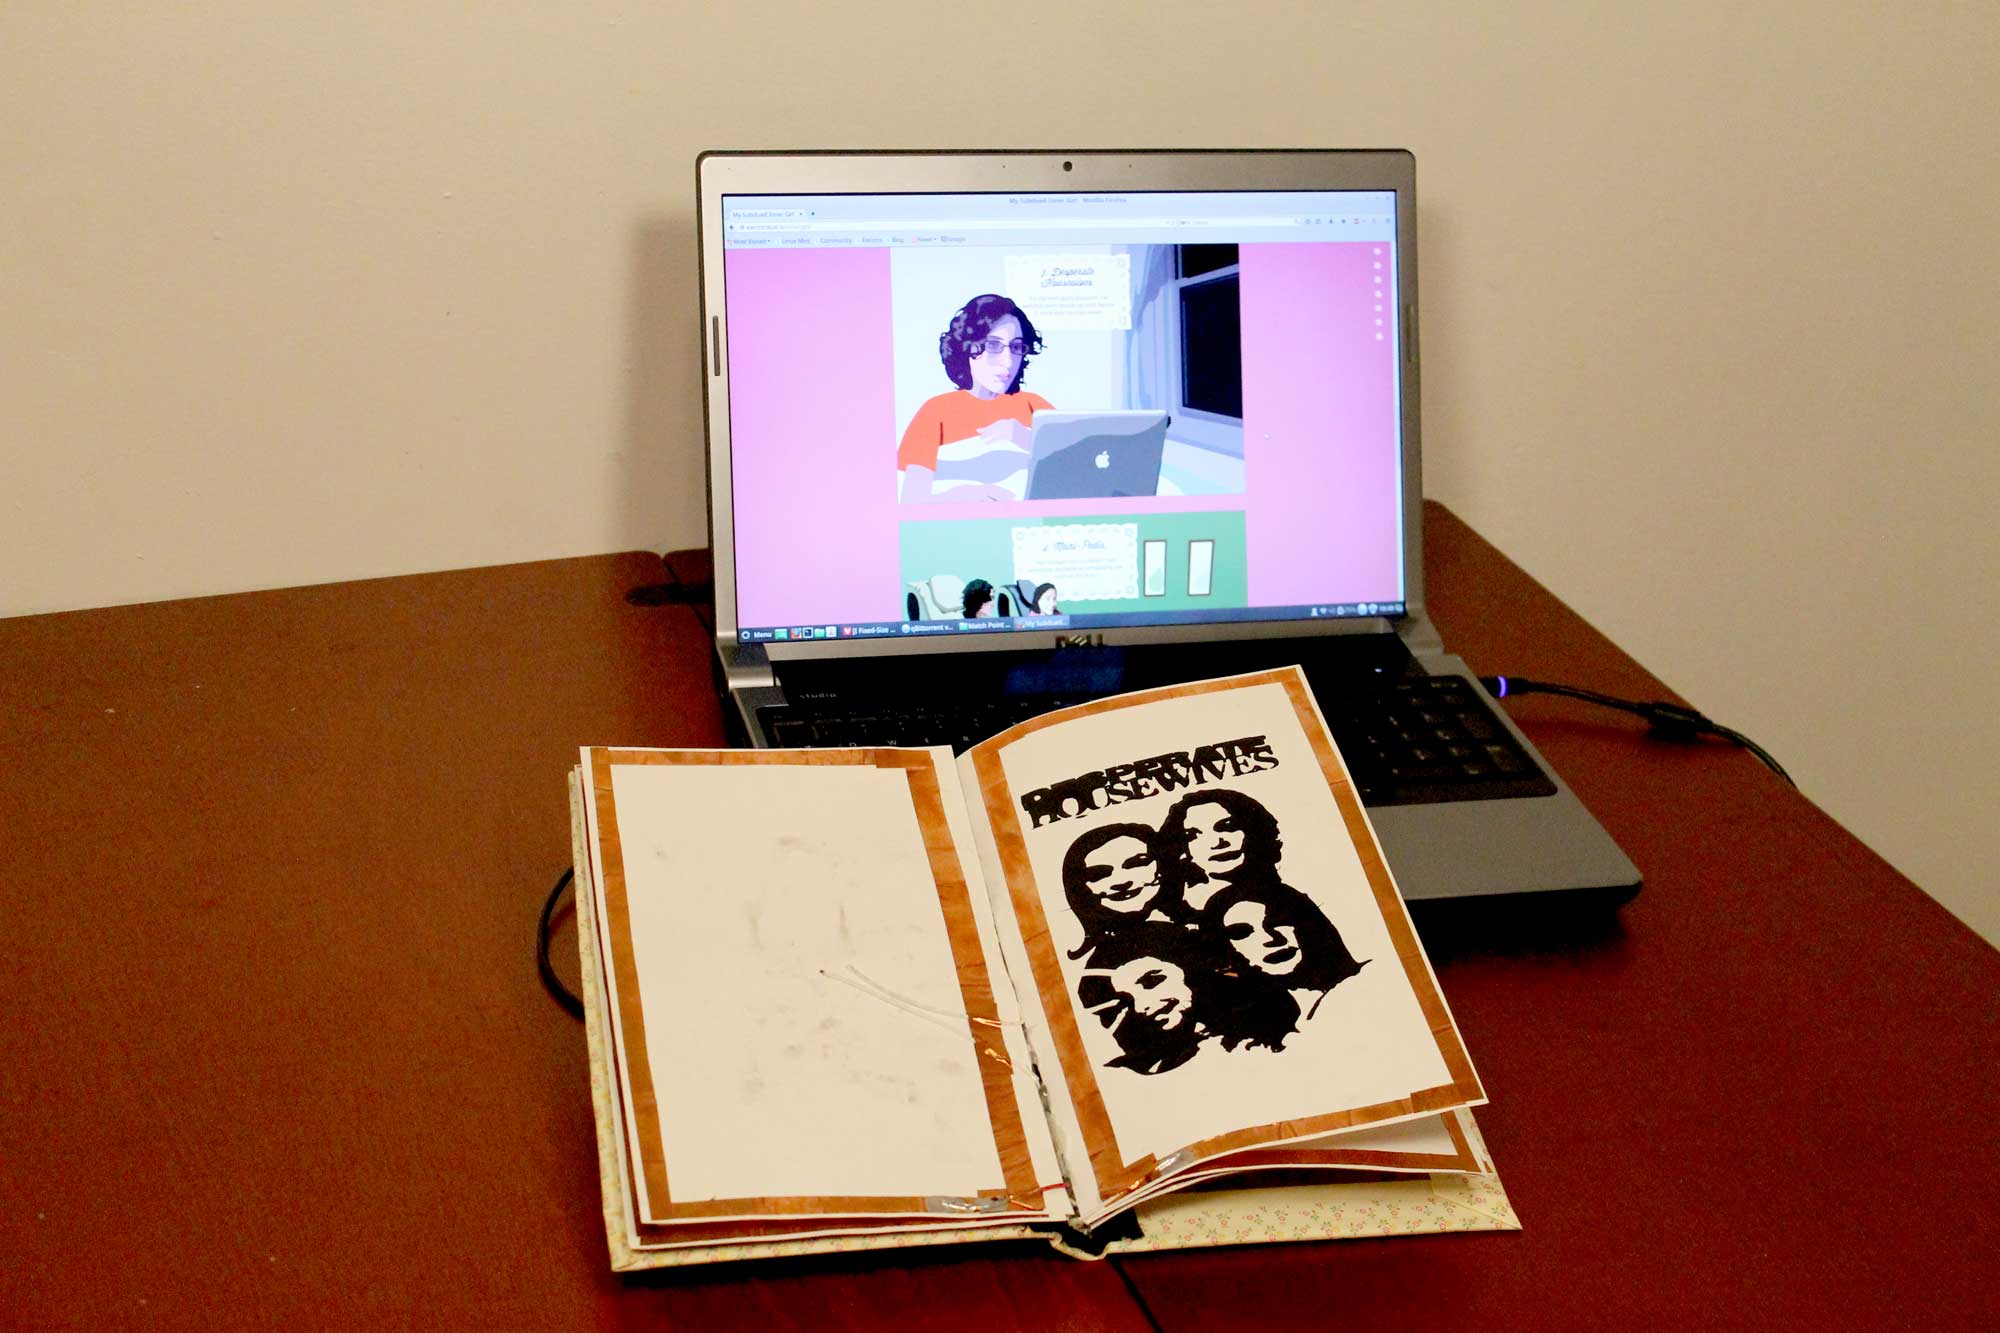 Ariel Cotton UI UX Design Physical Computing My Subdued Inner Girl Feminism Webcomic Conductive Ink Book